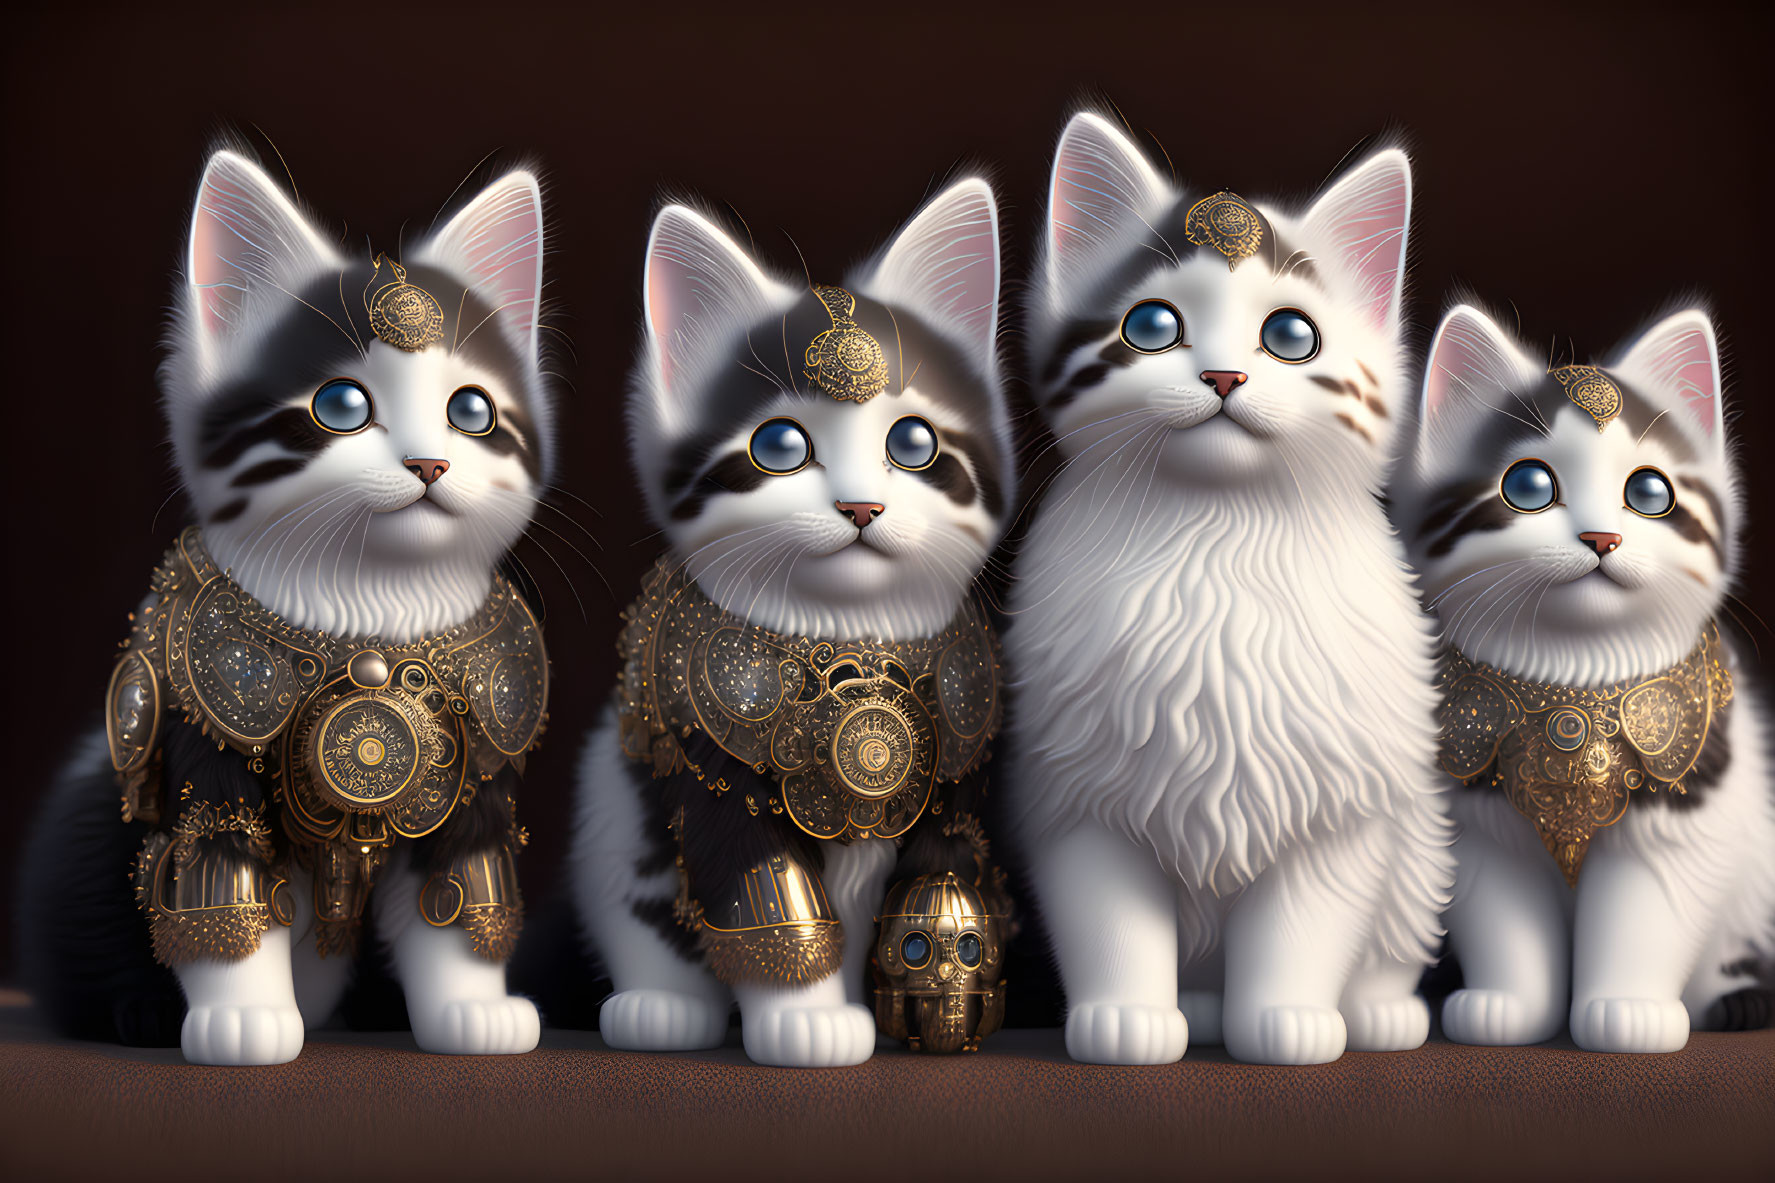 Four Fluffy Kittens with Golden Jewelry and Robotic Figure